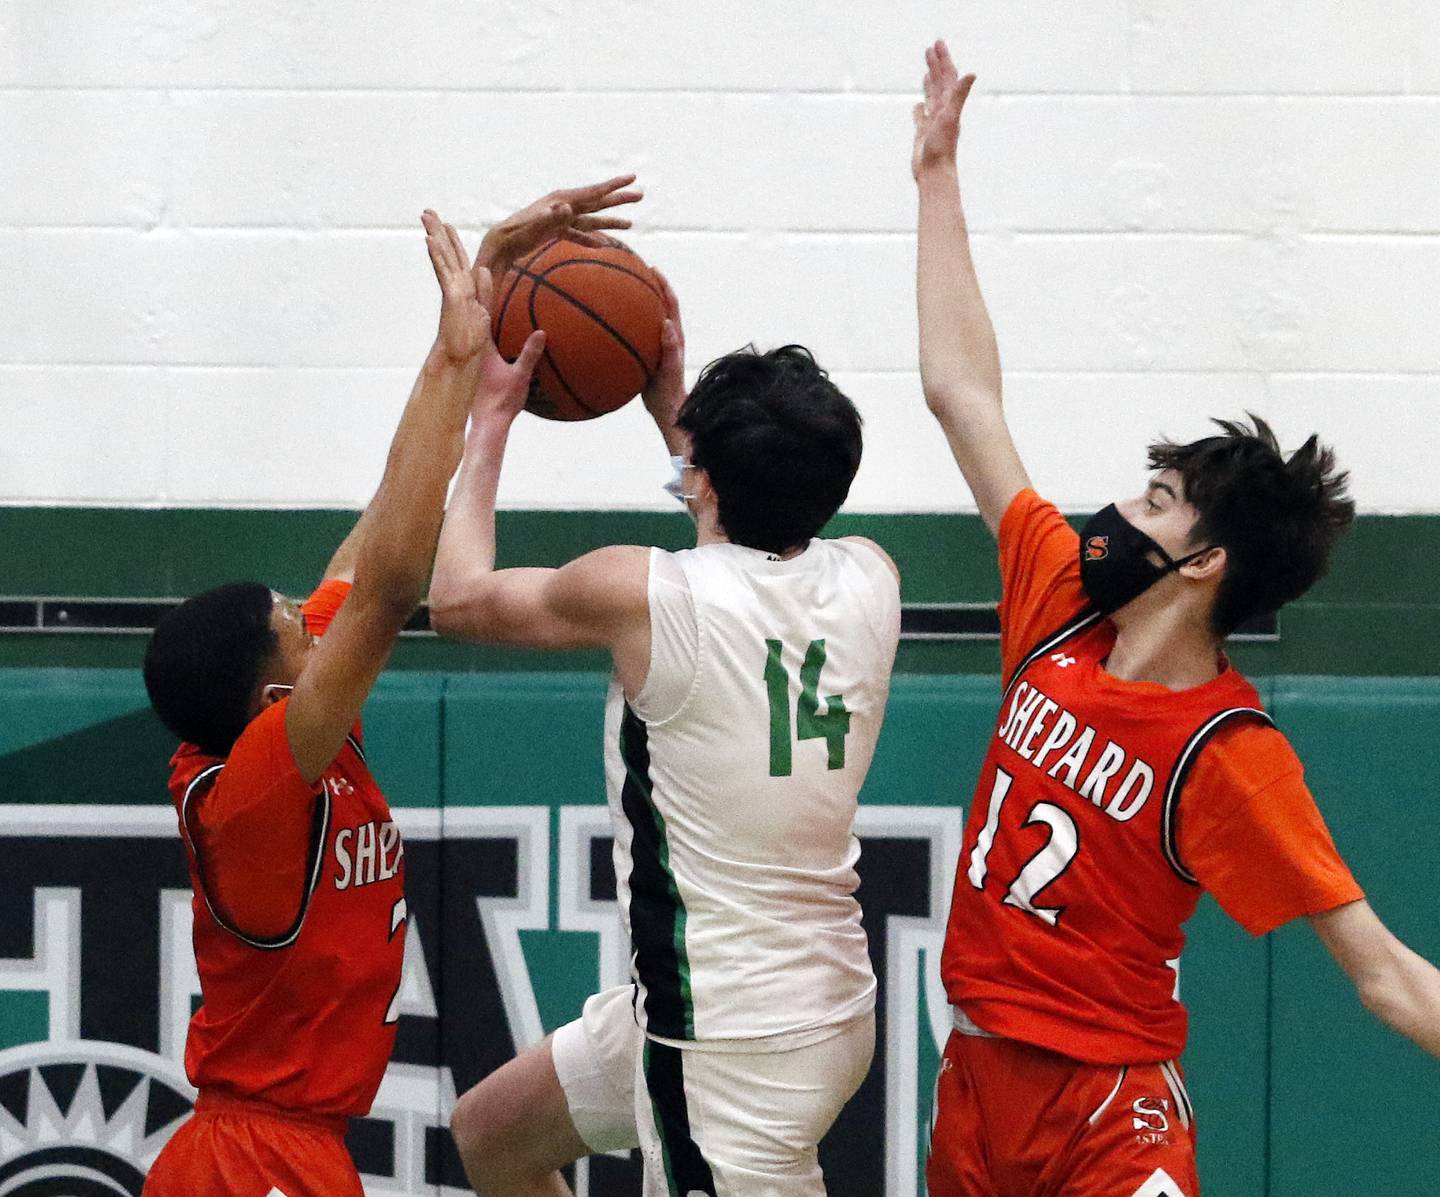 Oak Lawn's John McGowan drives through Shepard's Payton Crims, left, and Kevin Plascencia during a South Suburban Red game on Friday, Feb, 19, 2021.